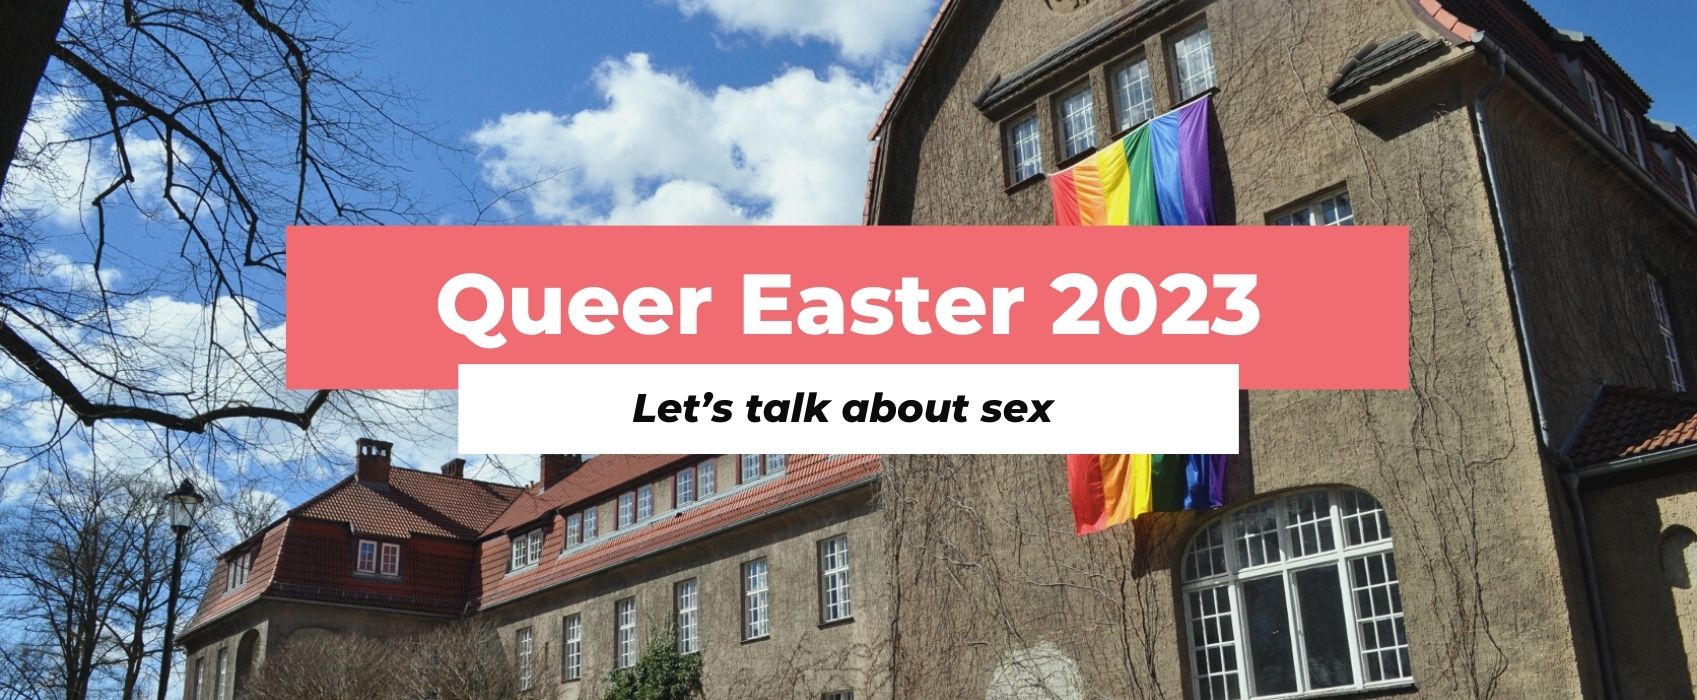 Queer Easter 2023 let's talk about sex